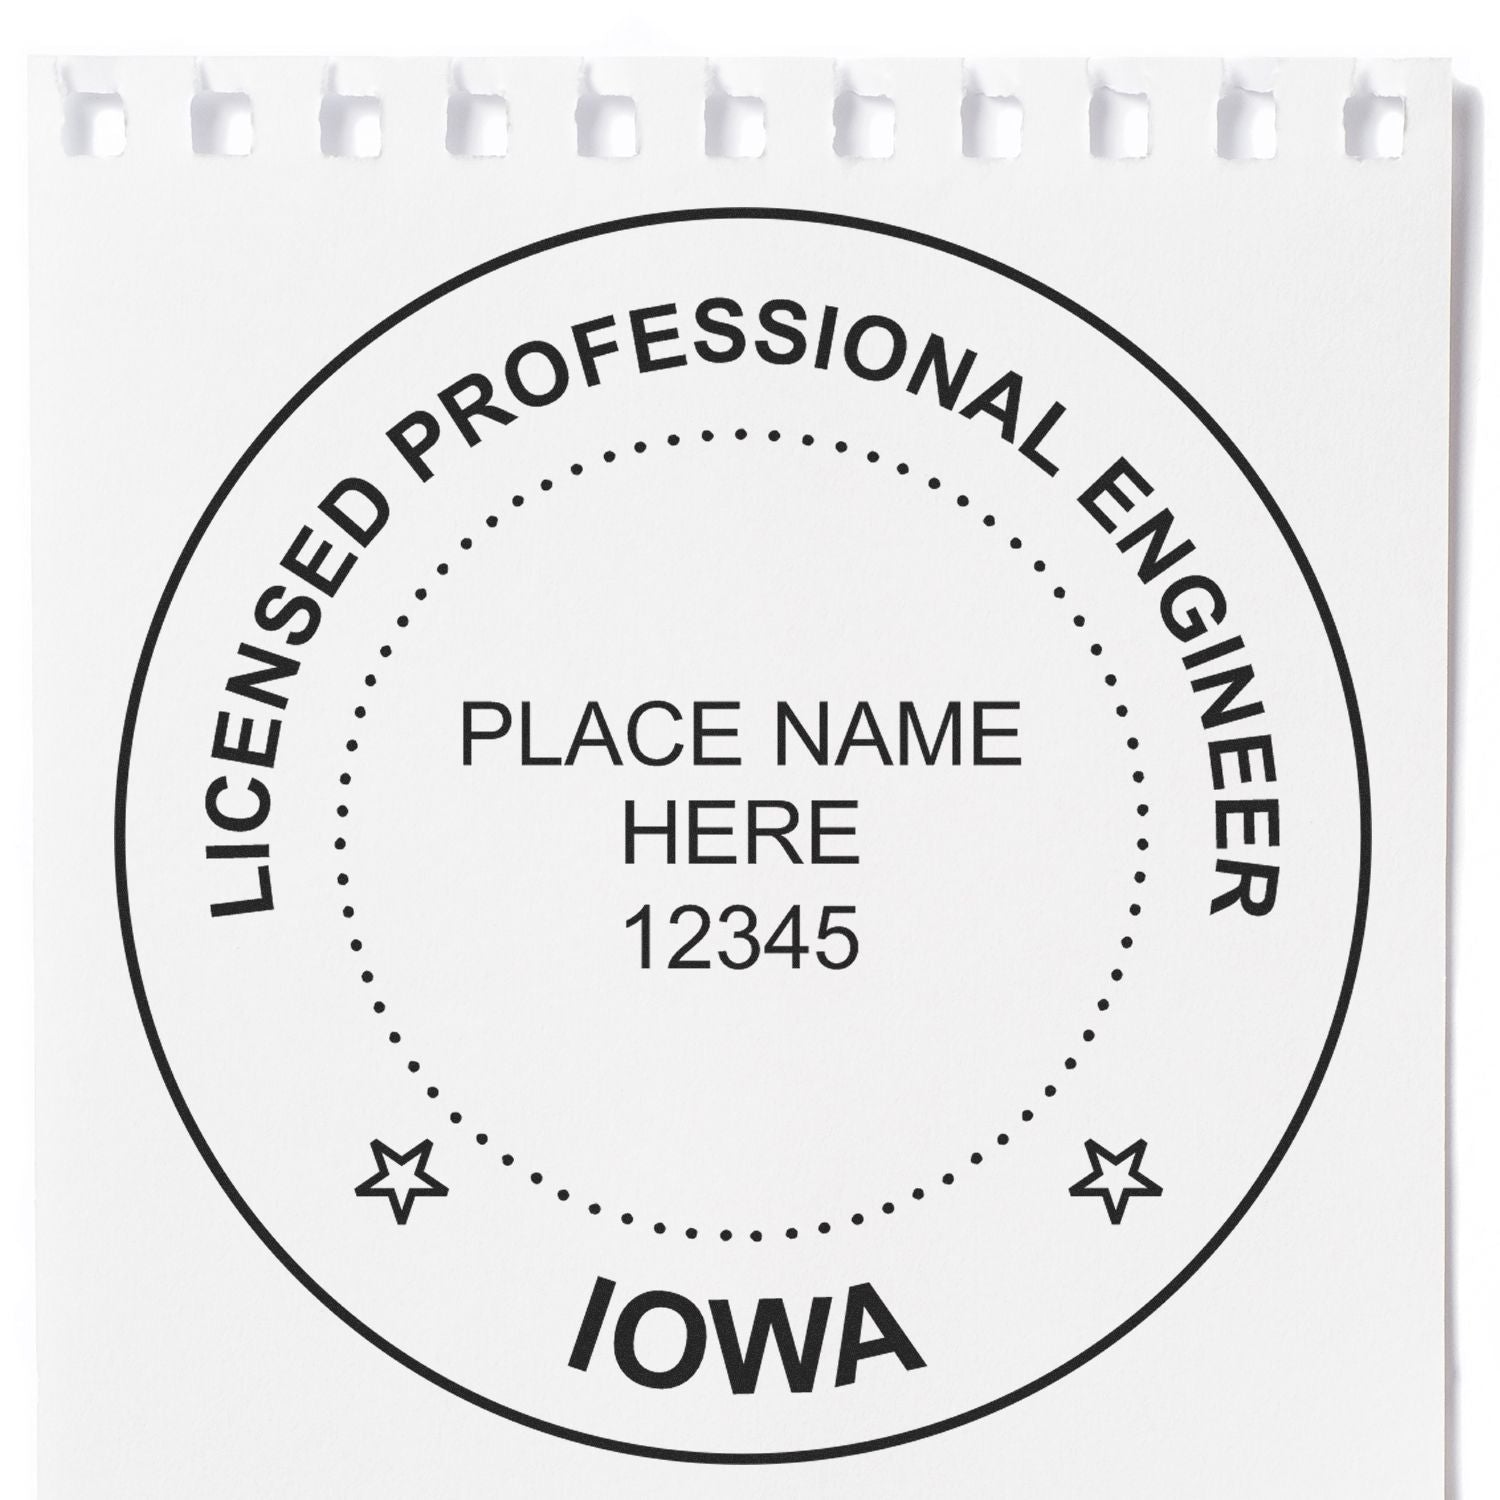 Keeping Your Seal Intact: Iowa PE Stamp Expiration Explained Feature Image